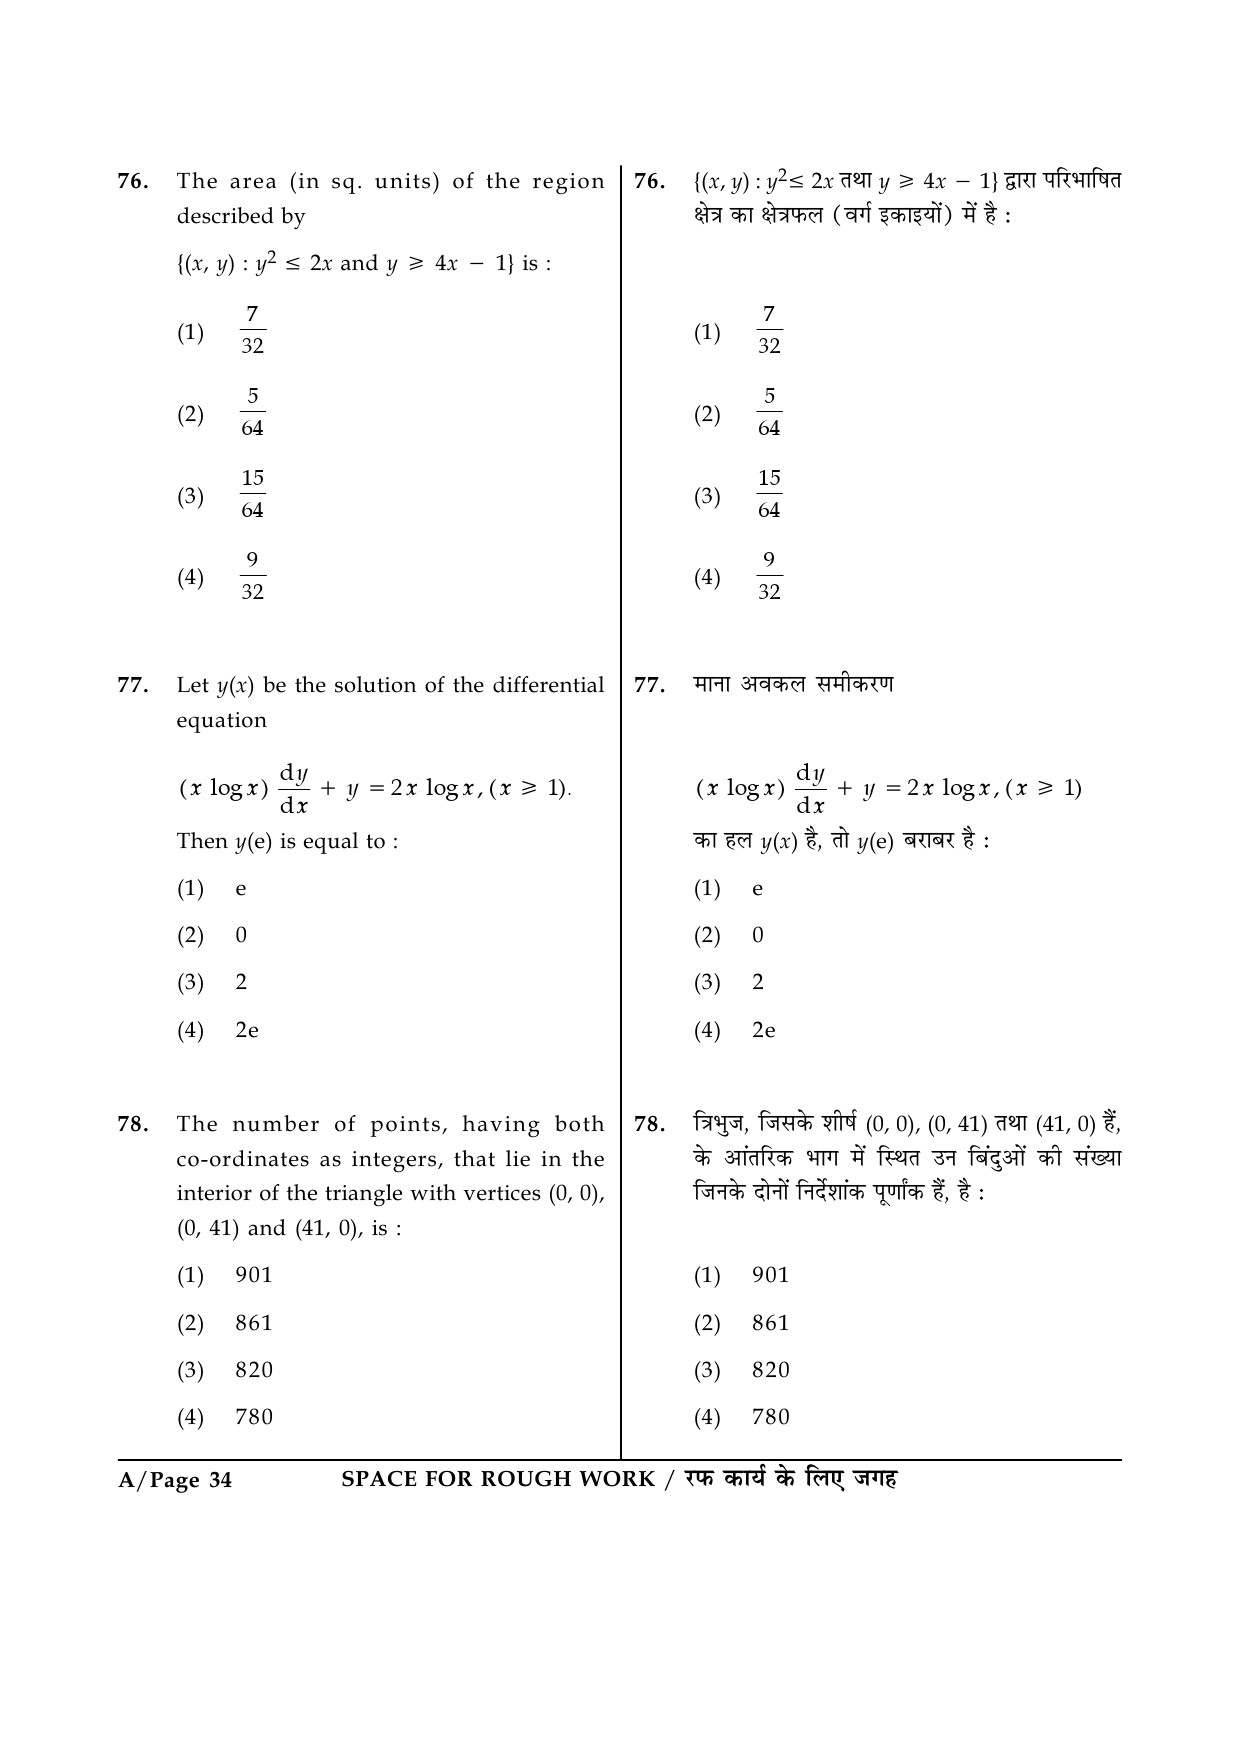 JEE Main Exam Question Paper 2015 Booklet A 34